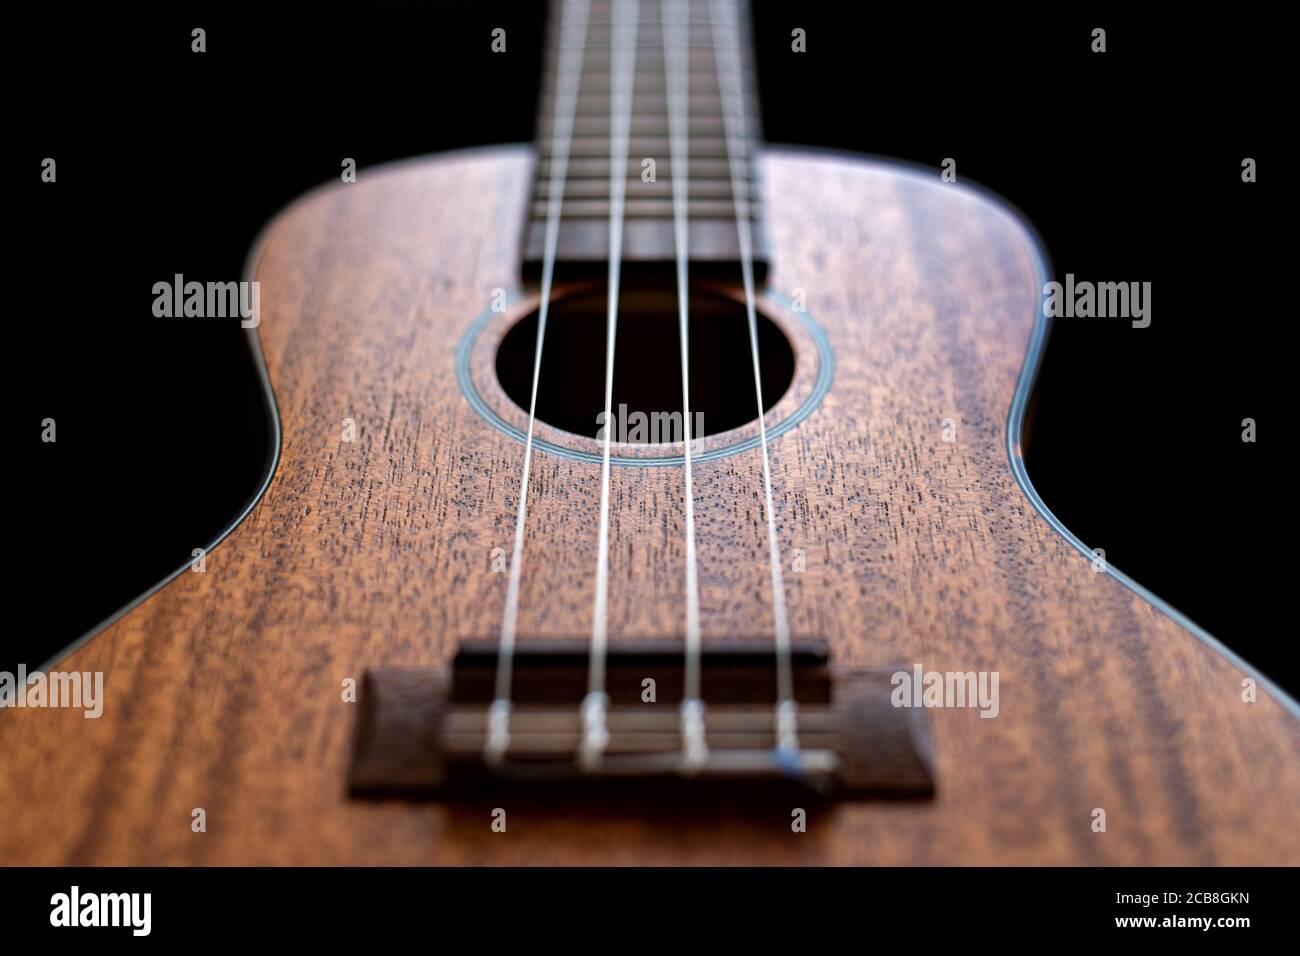 Close up view of a wooden ukulele body isolated on a black background. Stock Photo